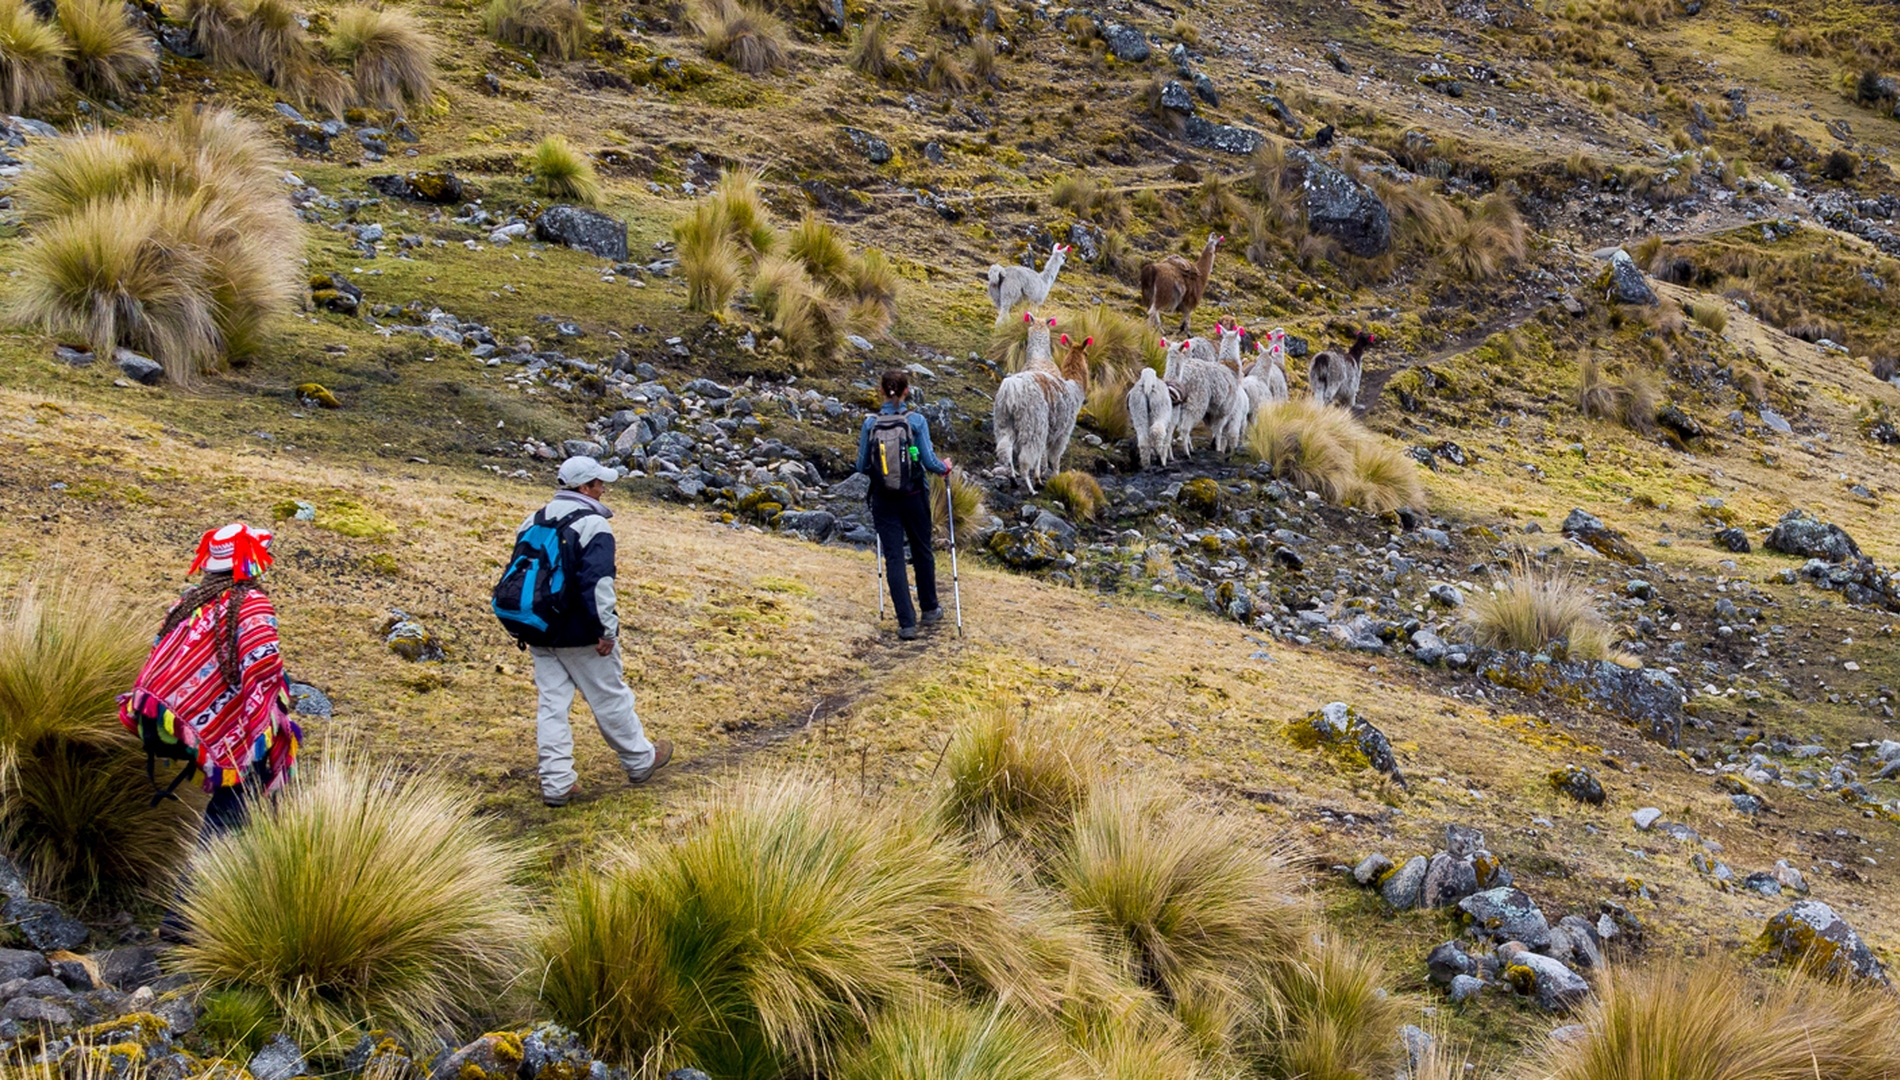 Group of Lares pax in the path with  llamas heading the route